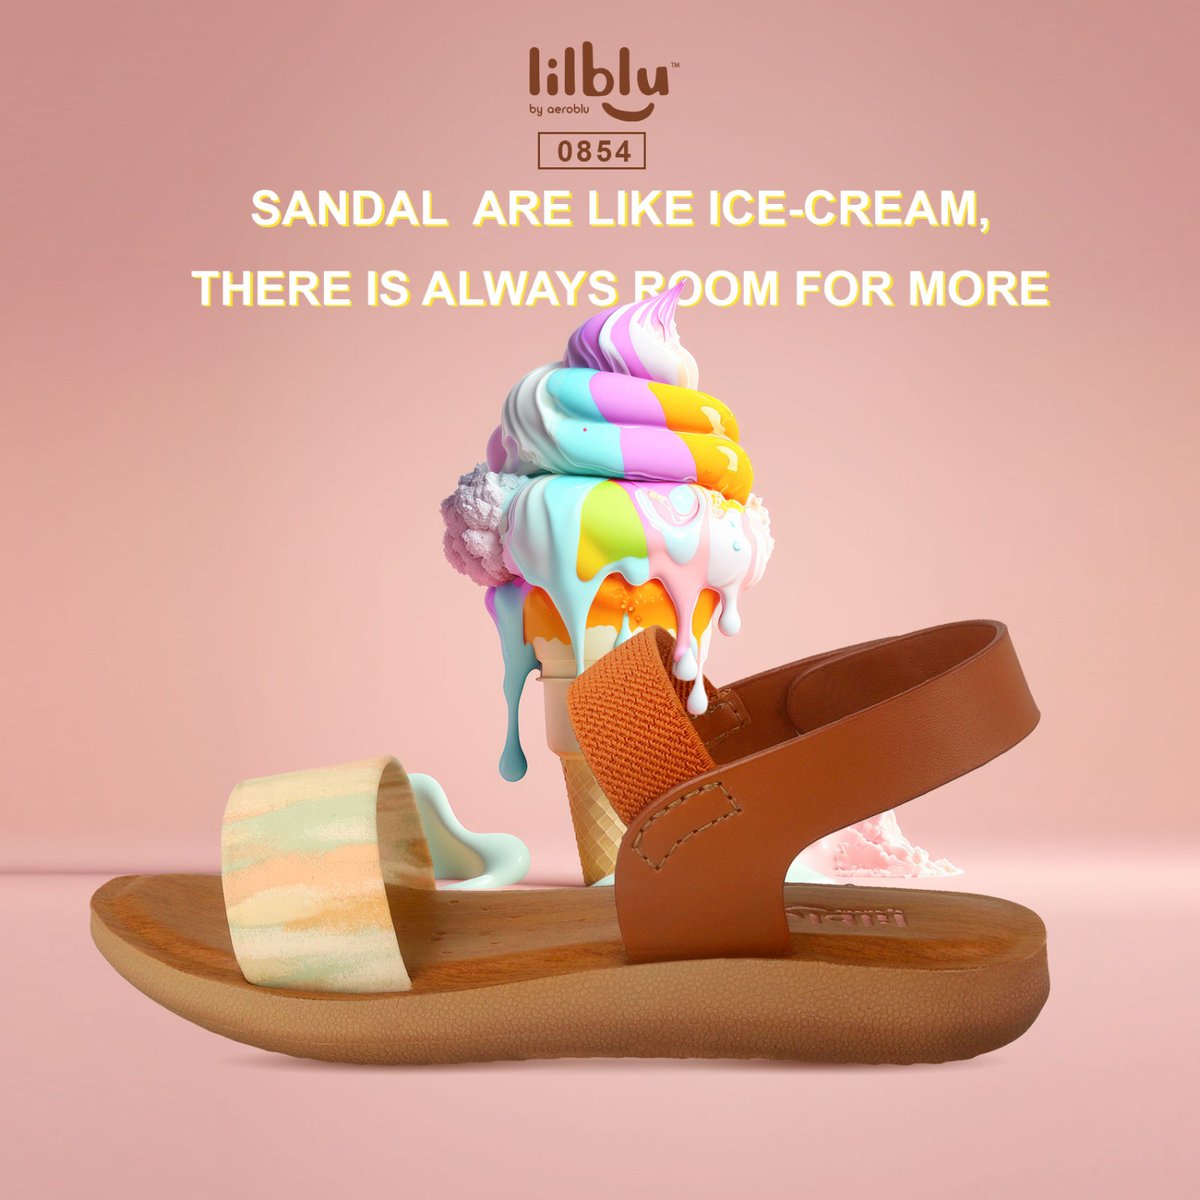 Sandal are like ice-cream, there is always room for more . . . #sandaladdict #shoeobsession #fashionfootwear #summersandals #shoegamestrong #footwearfaves #sandallove #walkinstyle #shoeselfie #icecreamandcandallove